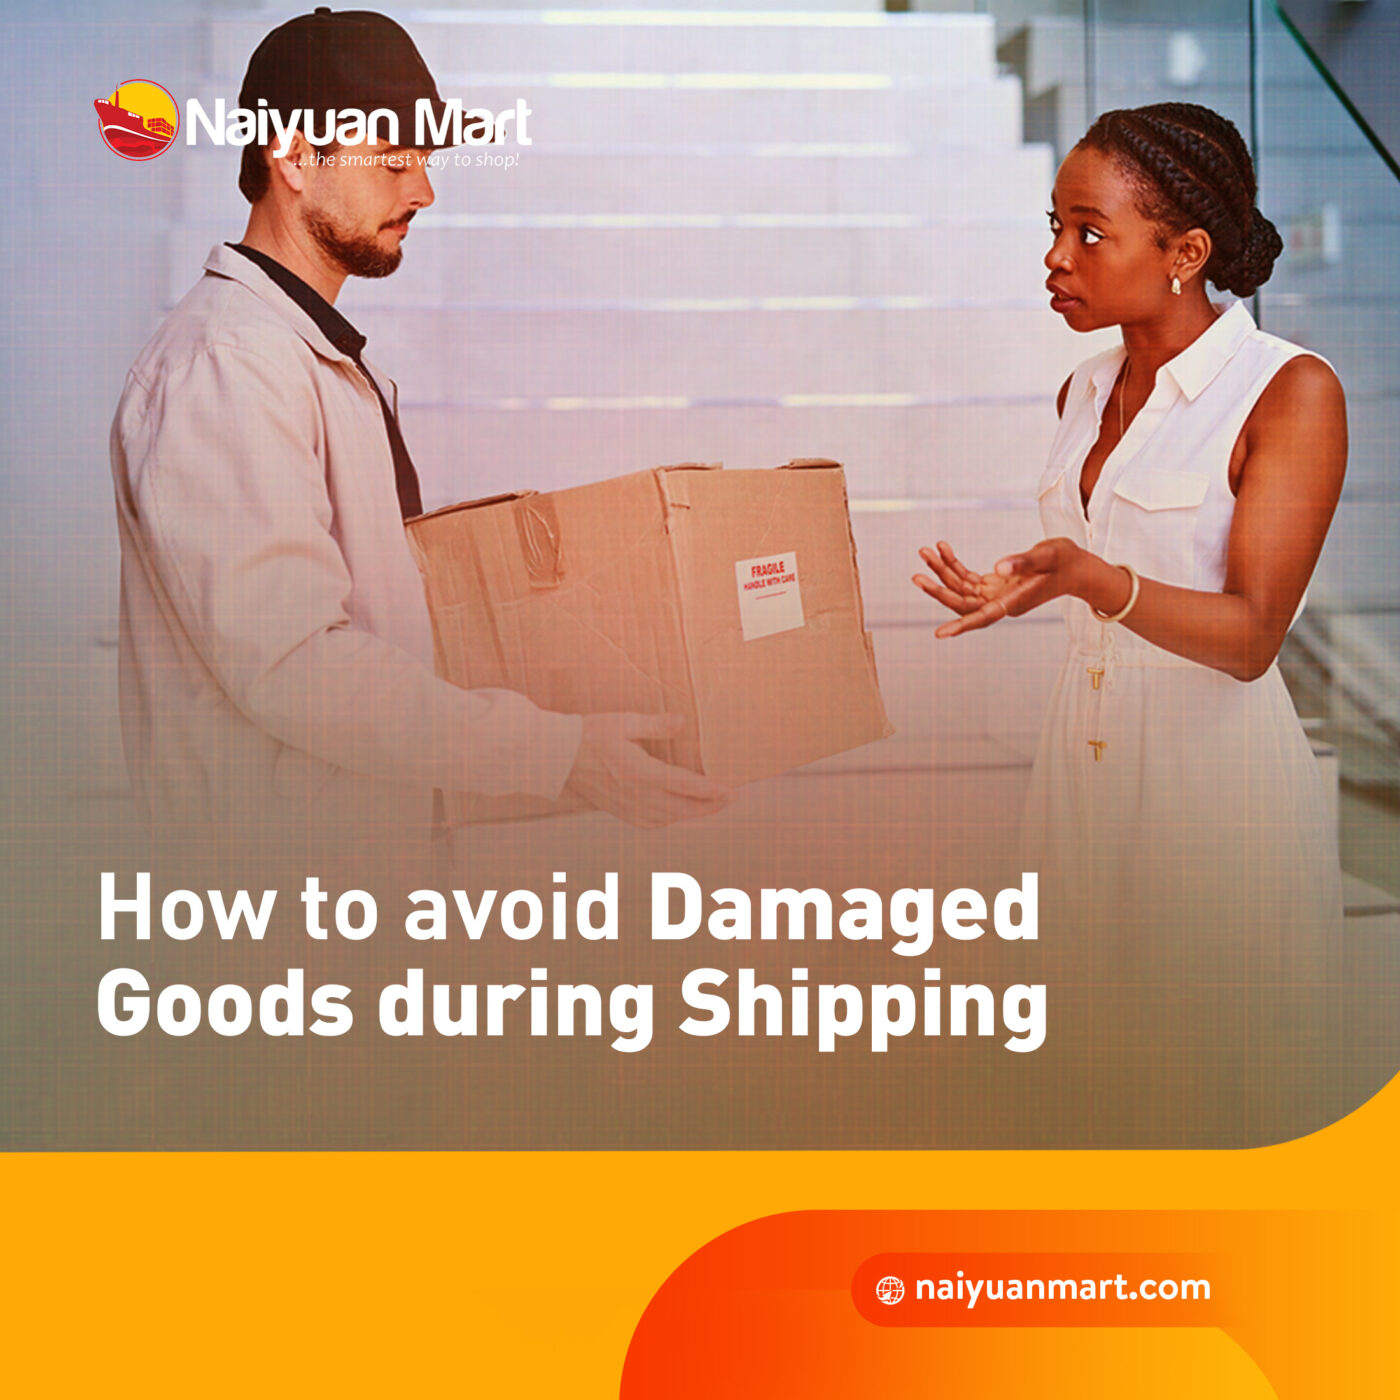 How to avoid damaged goods during shipping